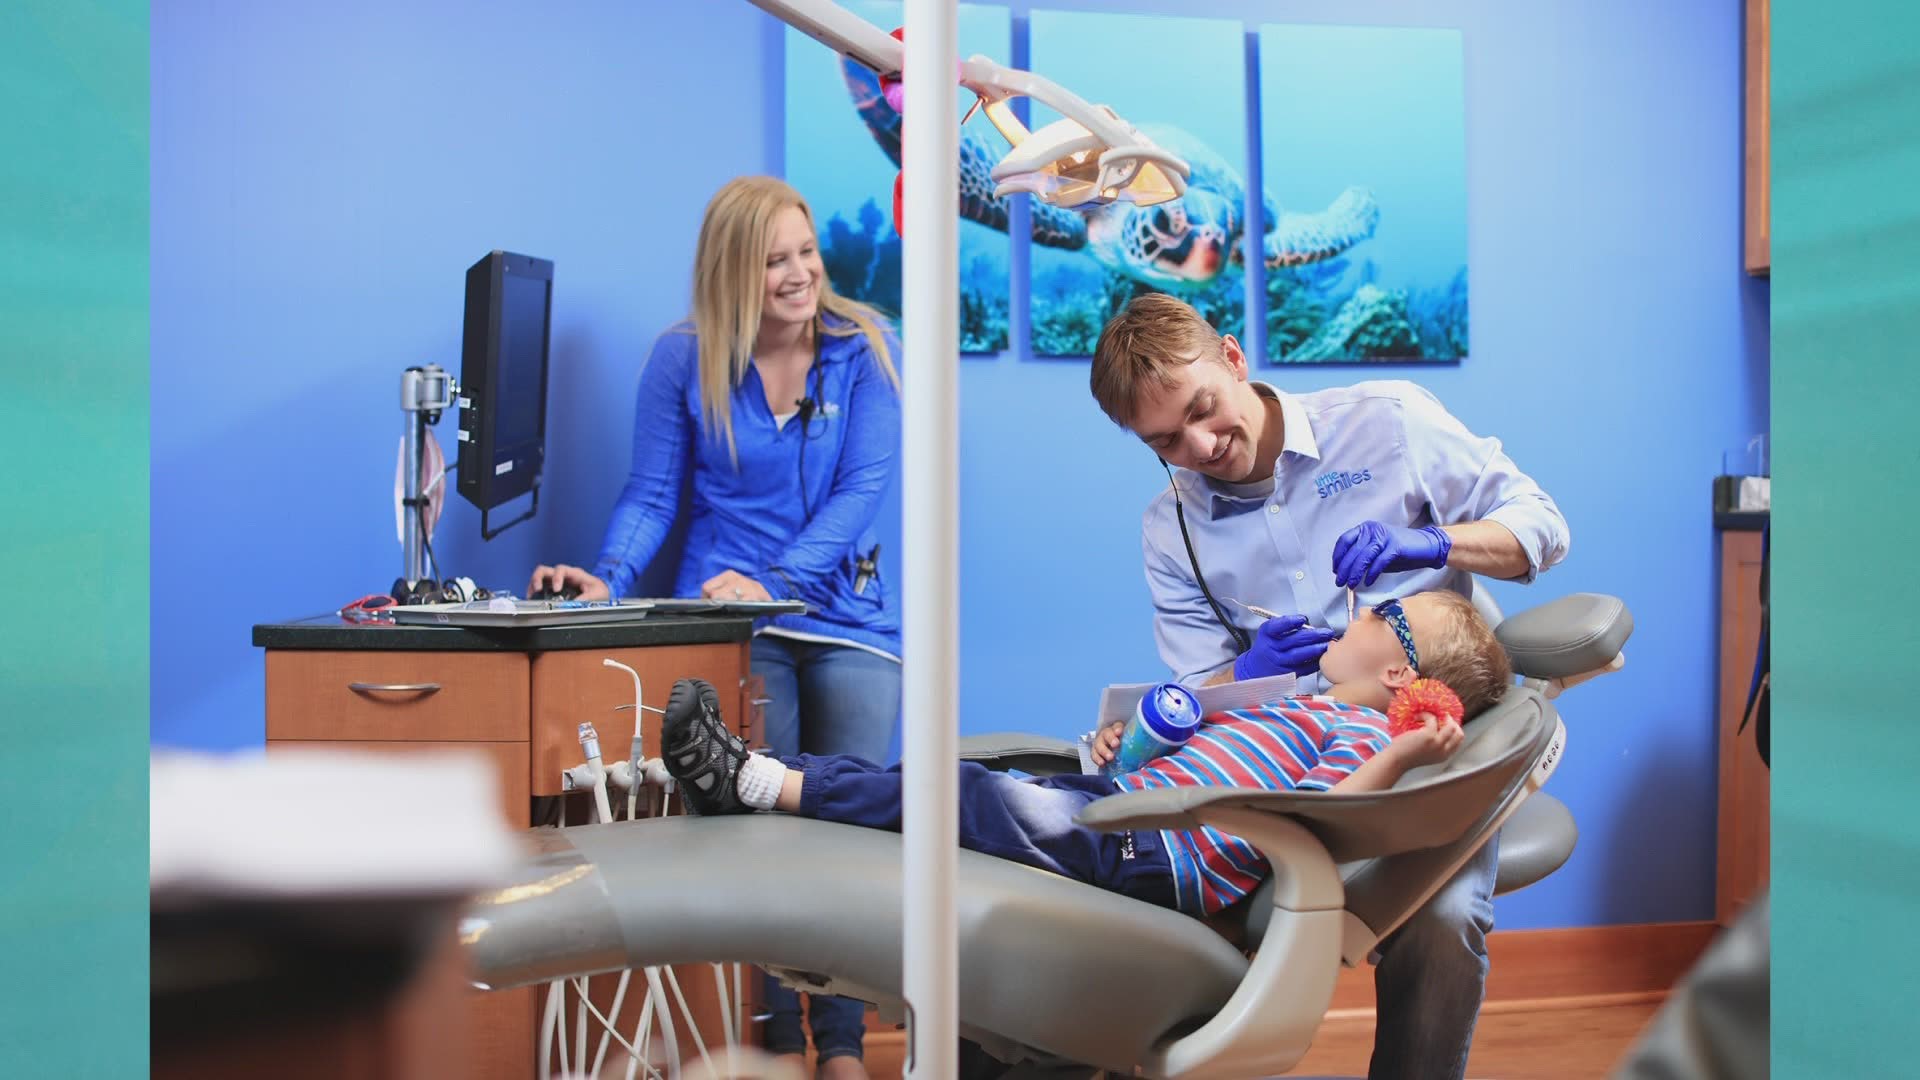 Smile Dental Partners’ “Little Smiles” gives children a positive experience at the dentist’s office